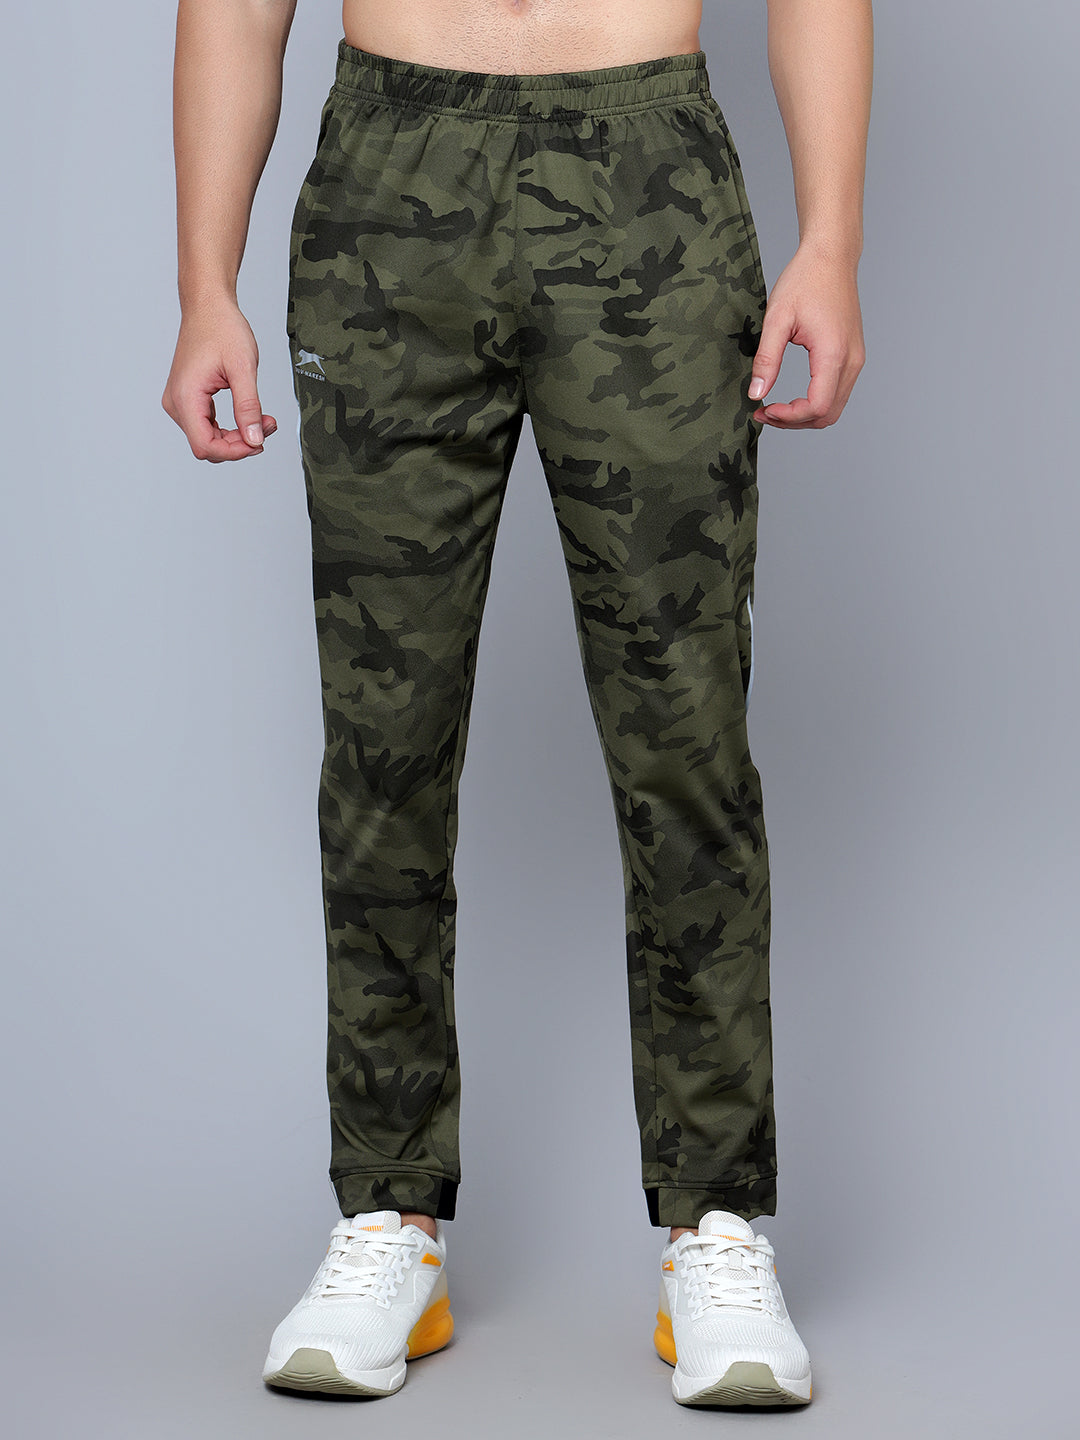 Buy Mens Army Military Combat Shorts Casual Cargo Half Pants Work Short  Trousers at affordable prices  free shipping real reviews with photos   Joom